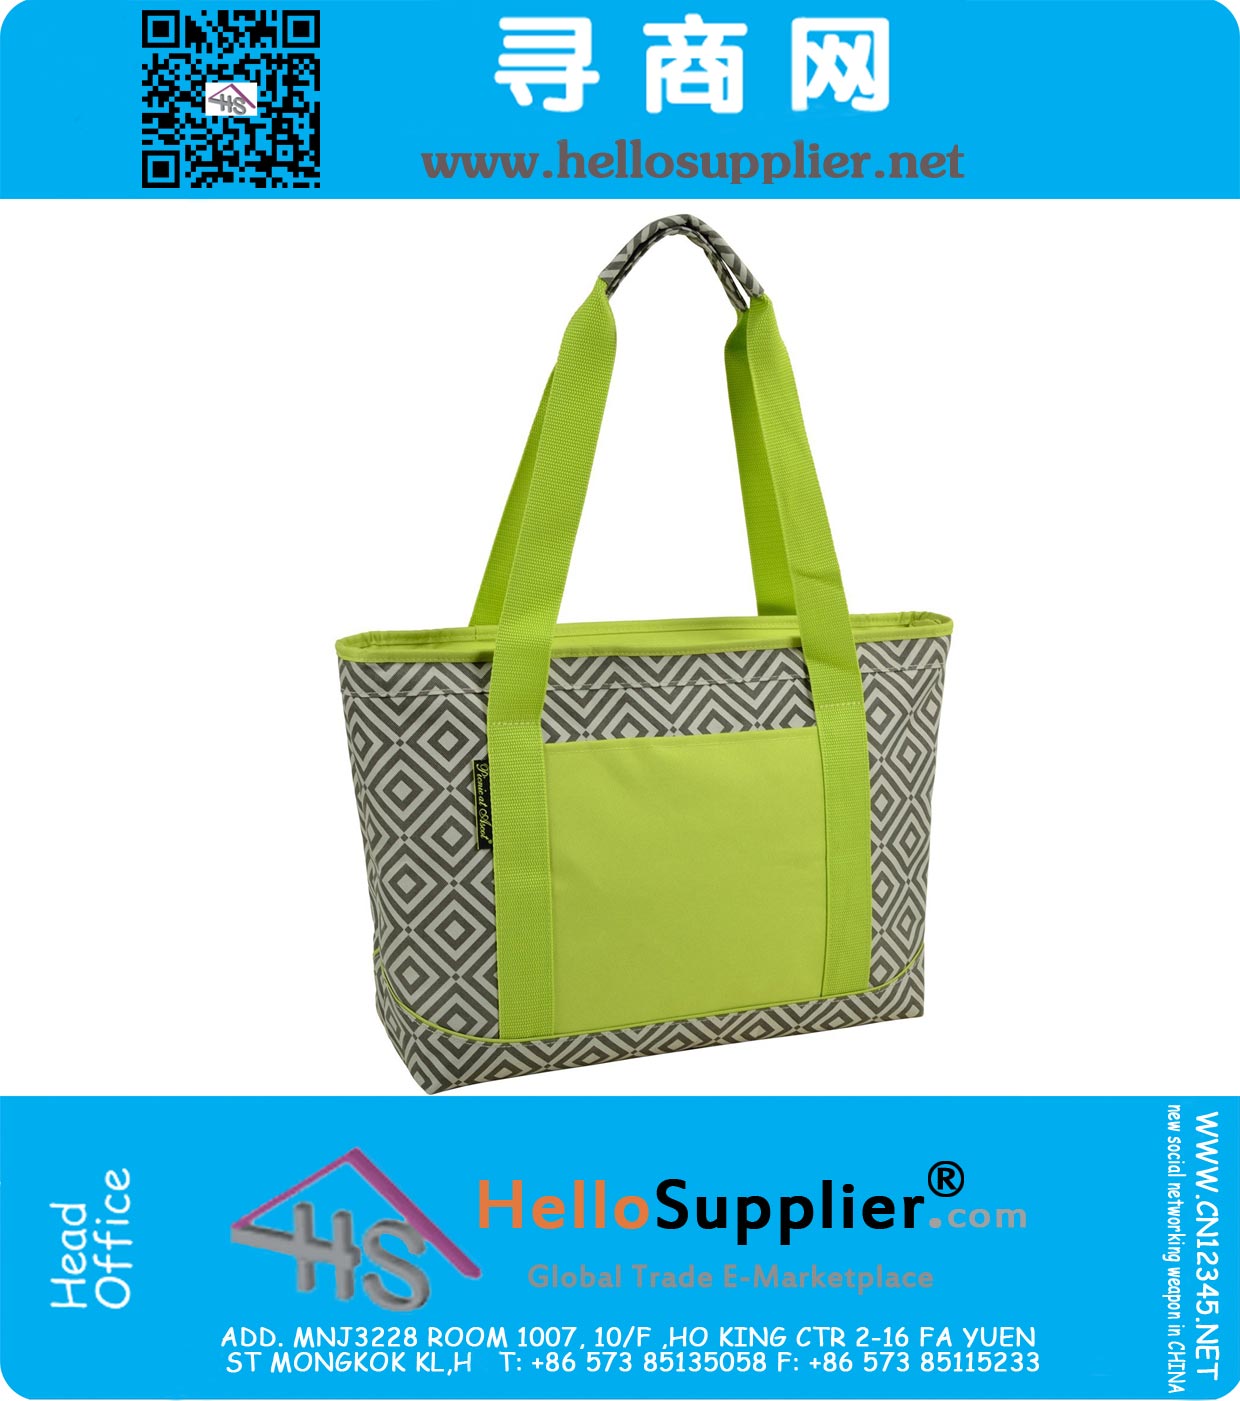 Large Thermal Cooler Tote Bag with 2 Freezer Ice Packs. Insulated Tote makes a great Picnic Bag, Shopping bag, Beach Tote and Drink Cooler